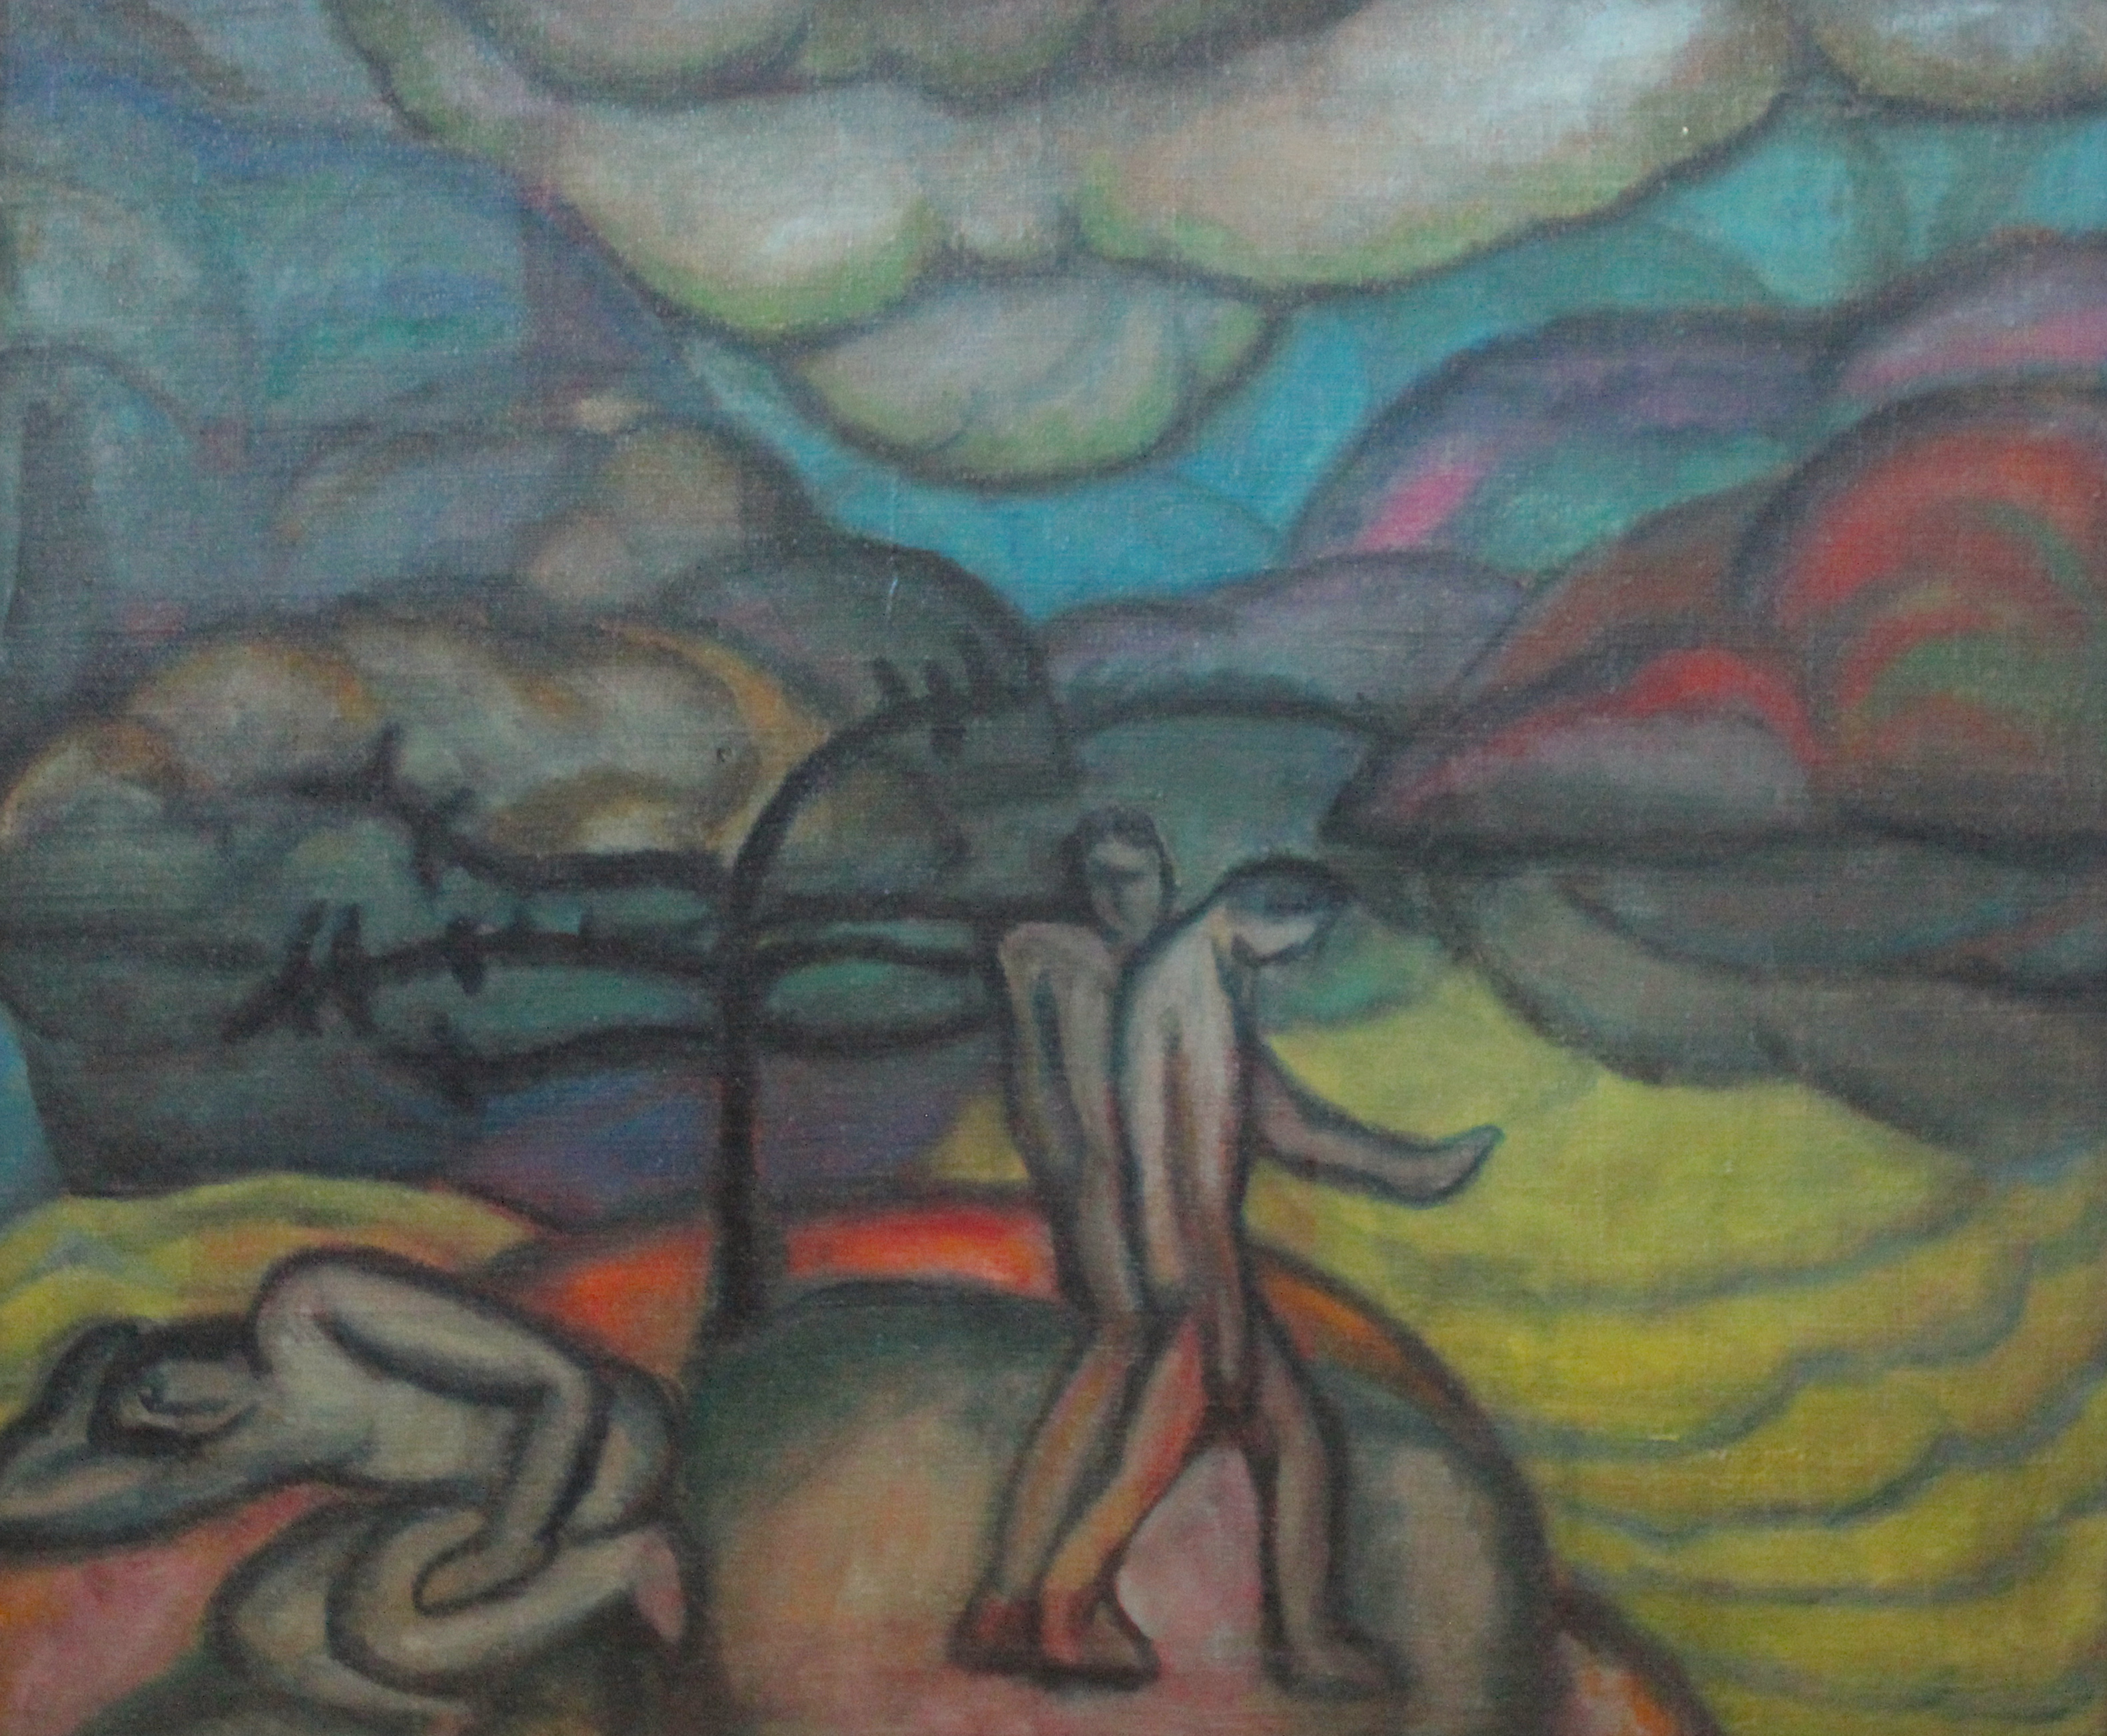 The Expulsion by Marguerite Zorach